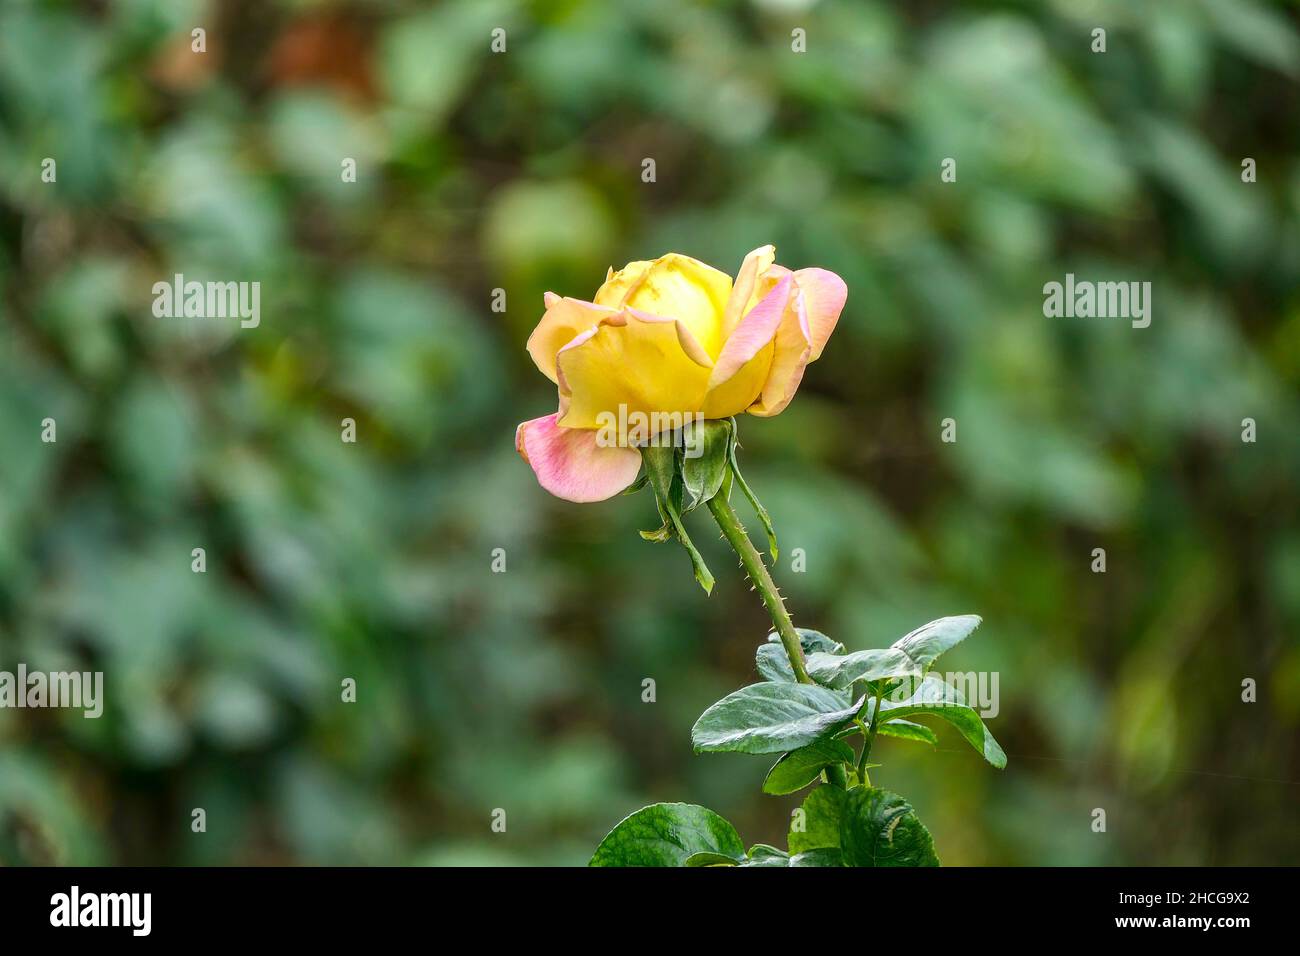 Side view of a yellow-pink flower hybrid tea roses closeup on a green blurred background. Selective focus Stock Photo